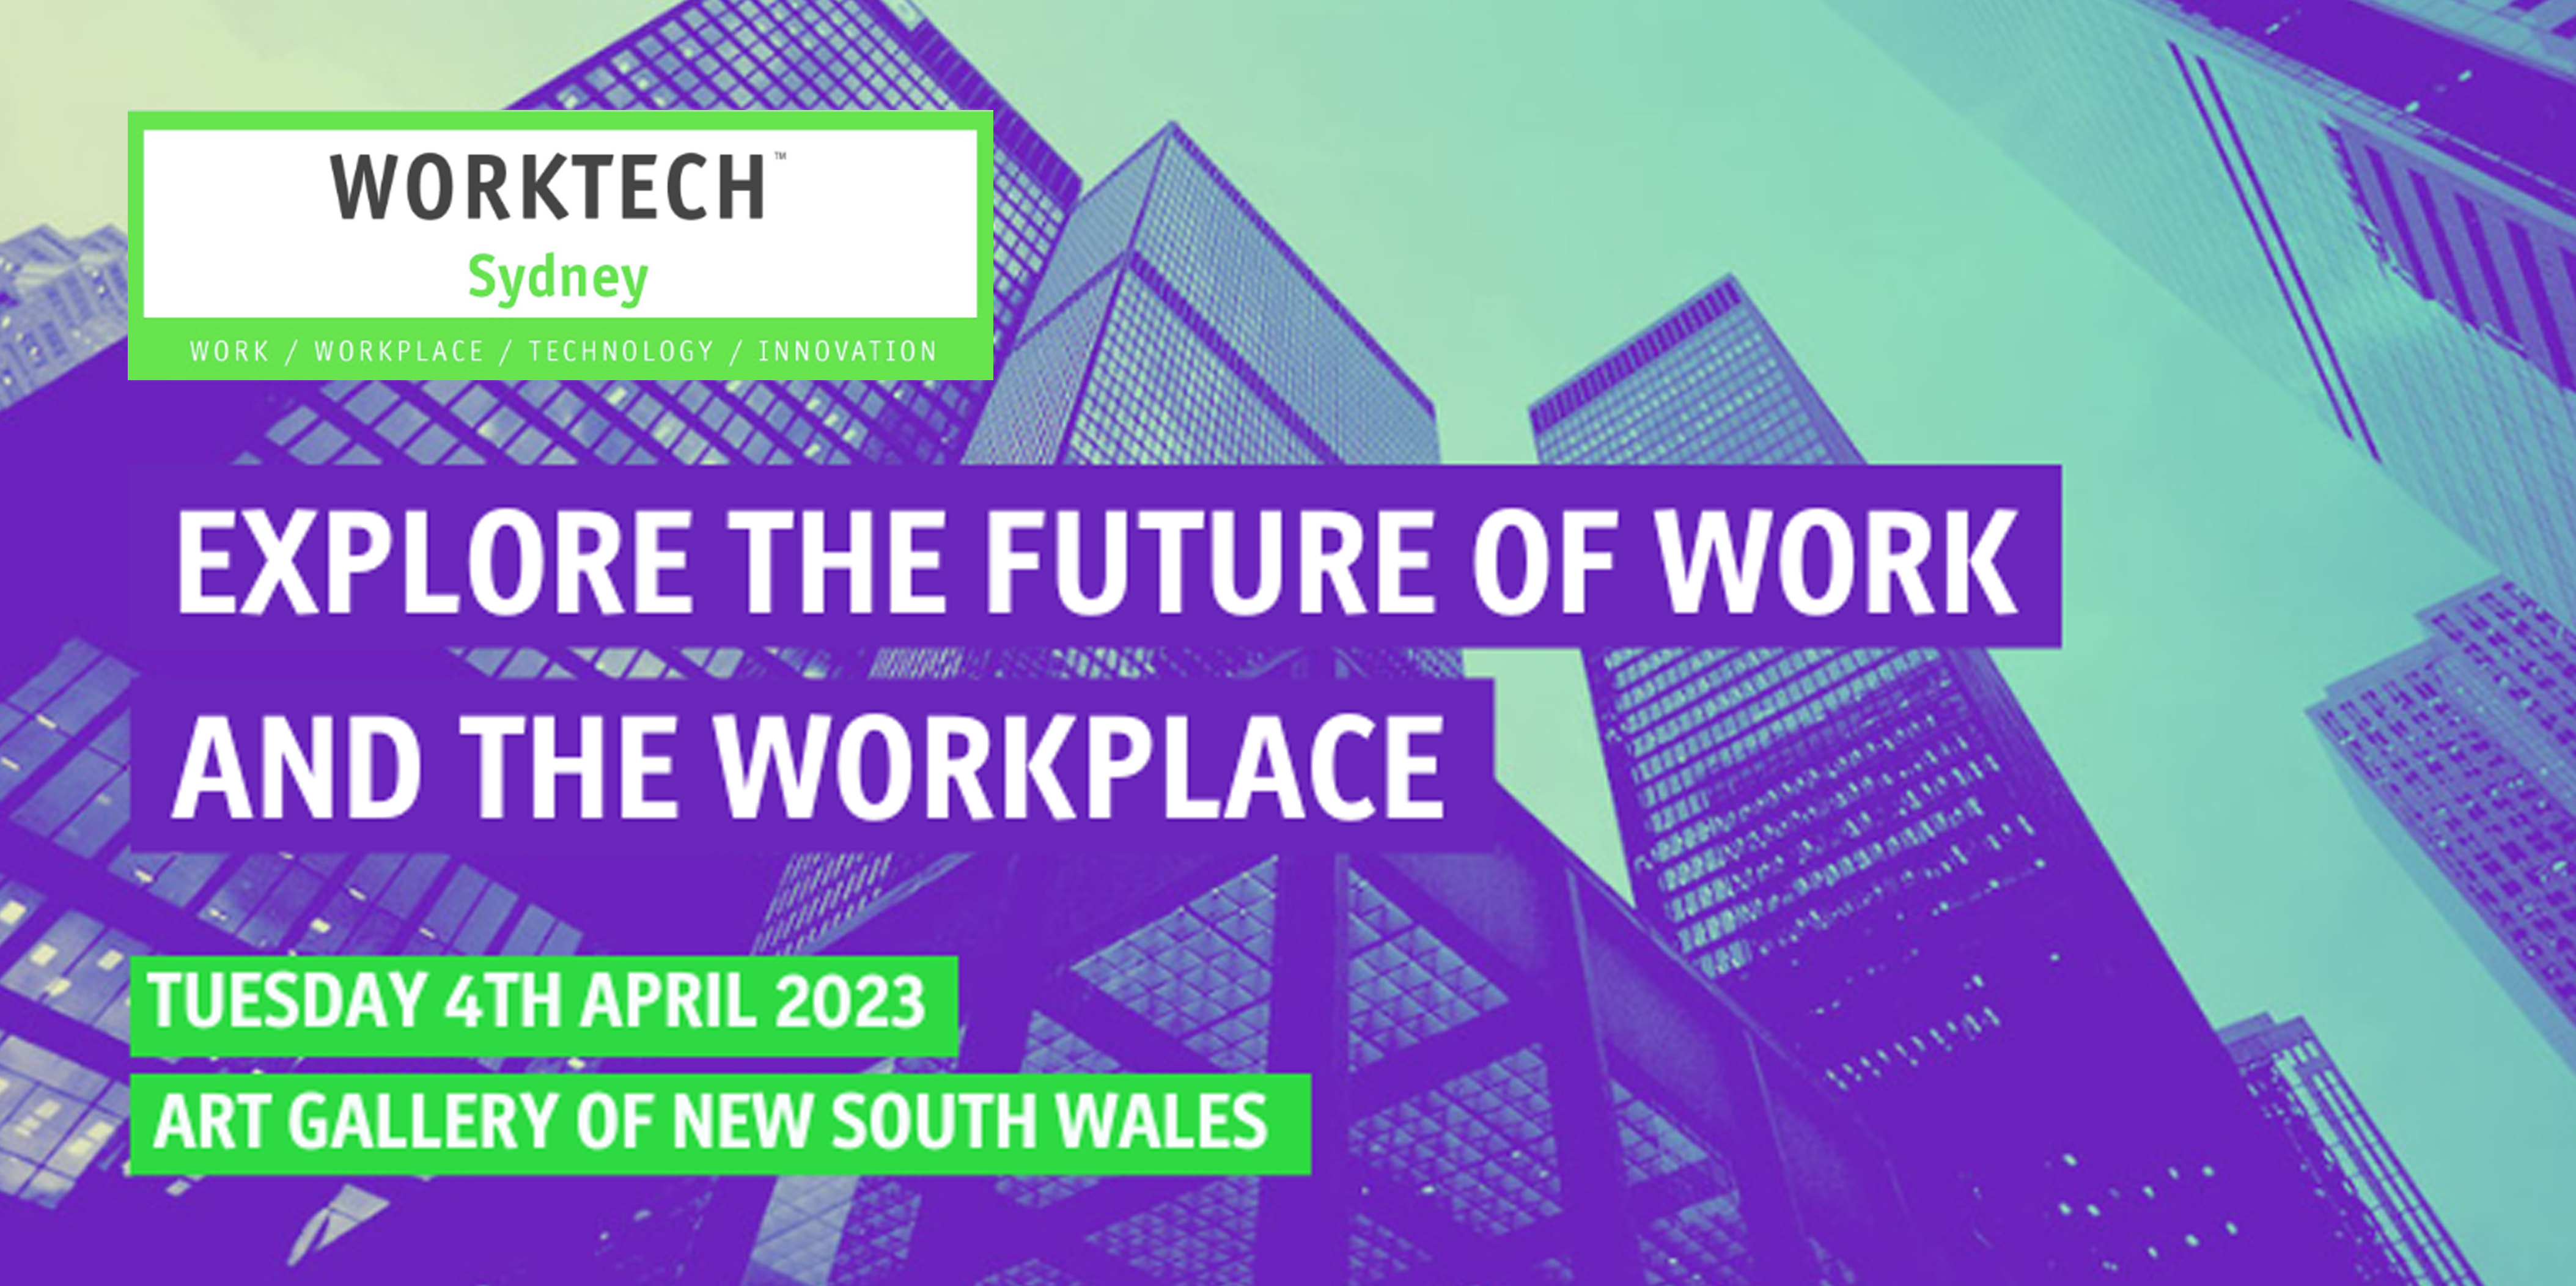 WORKTECH 2023 – 5 Global Office Trends of the Future